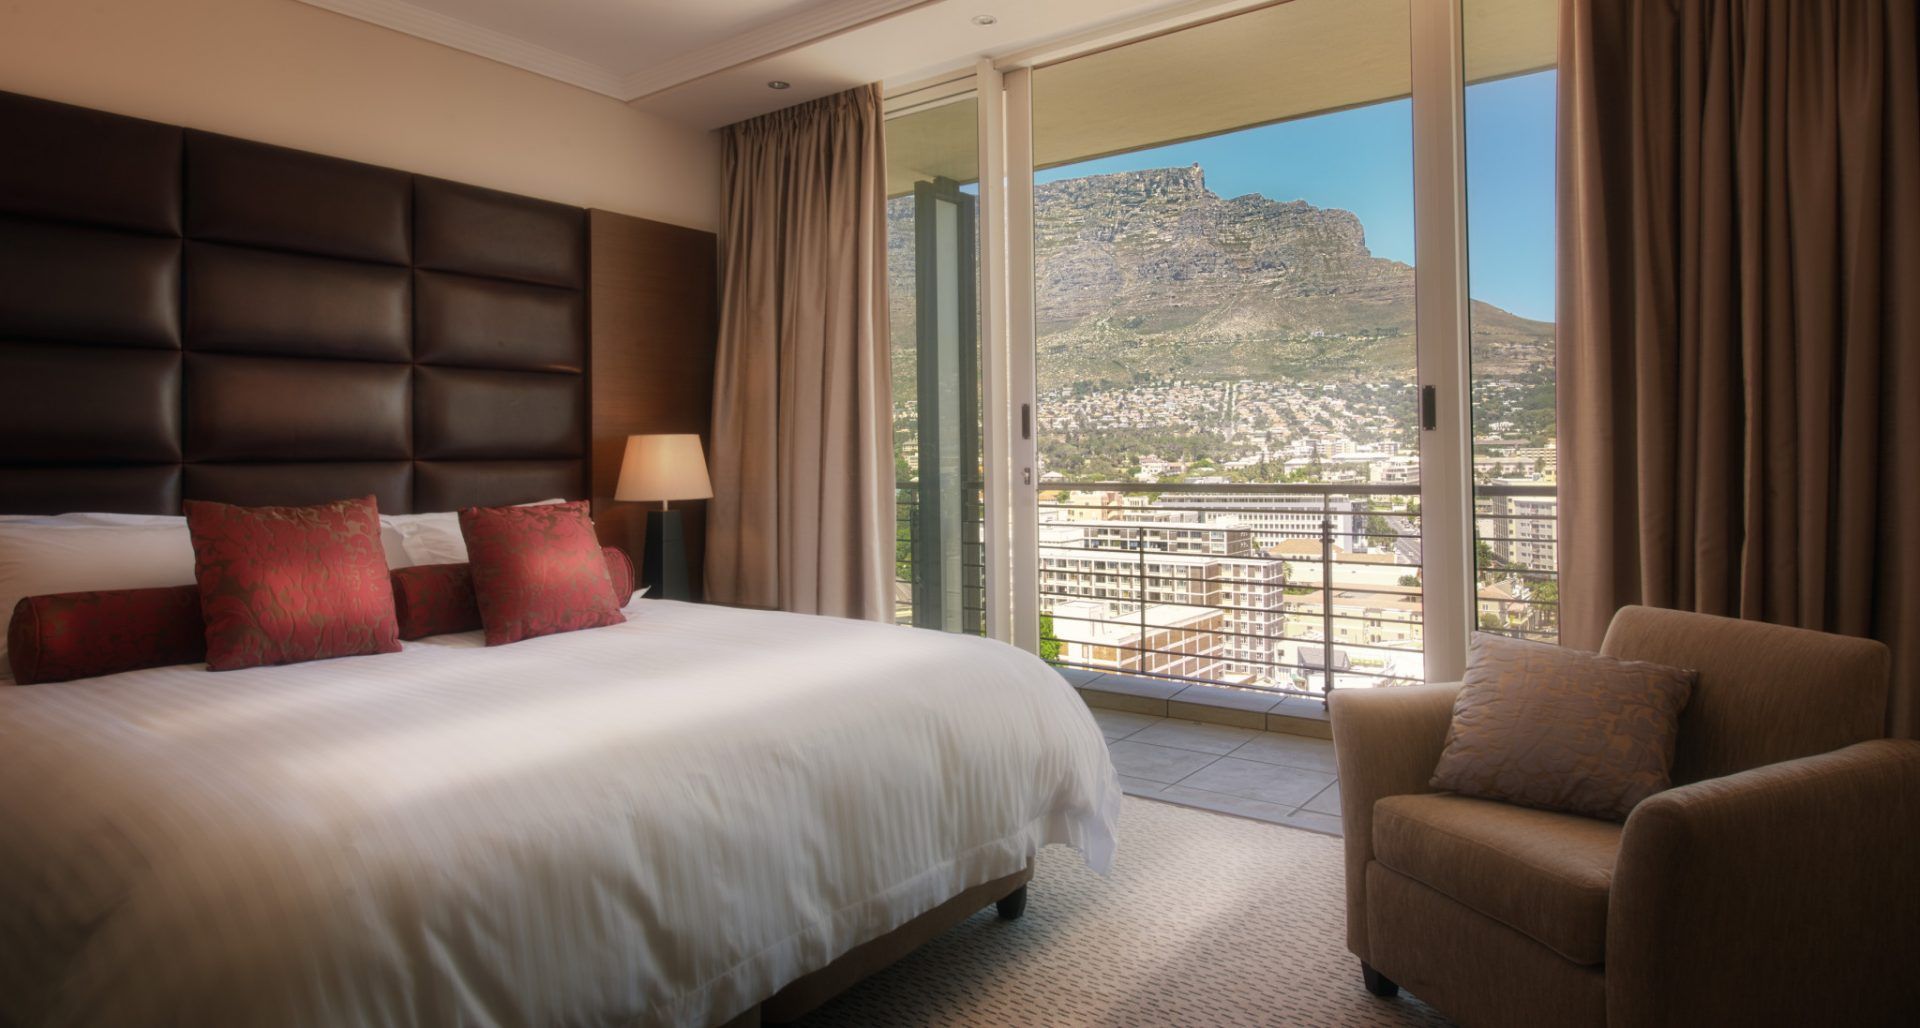 Photo 5 of Pepperclub Presidential Suite accommodation in City Centre, Cape Town with 3 bedrooms and 3 bathrooms